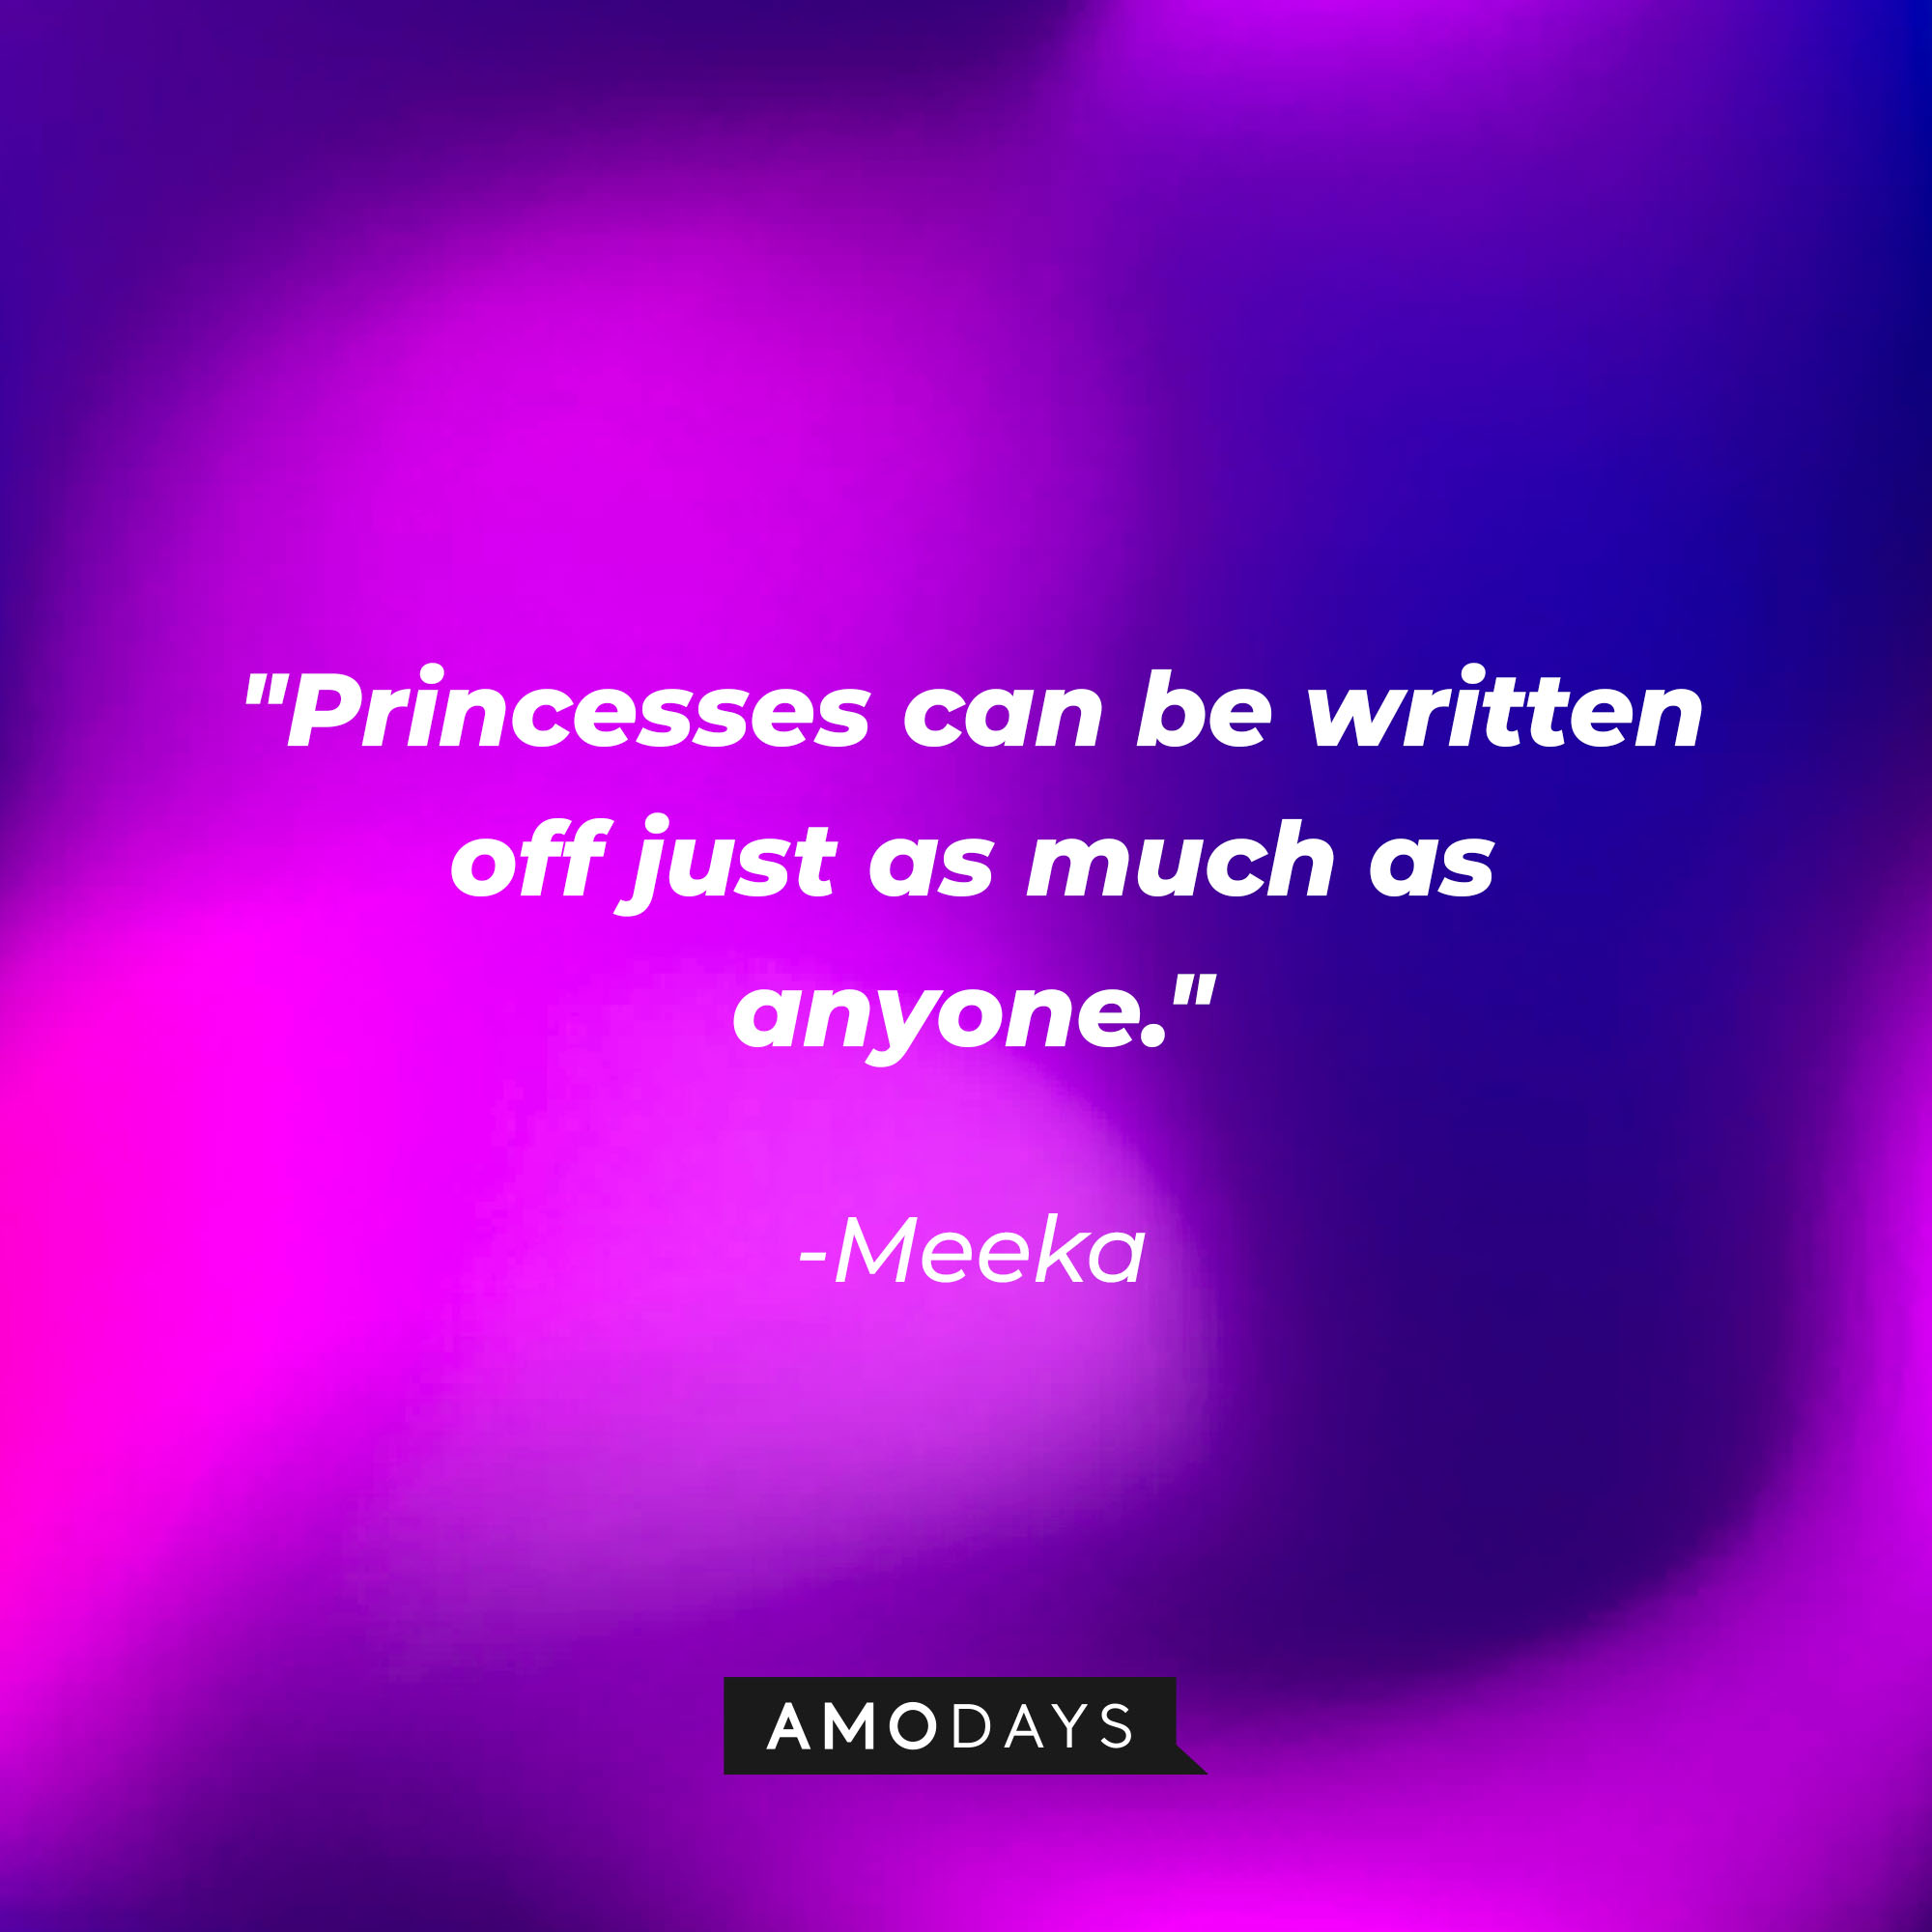 Meeka’s quote: "Princesses can be written off just as much as anyone." | Source: AmoDays